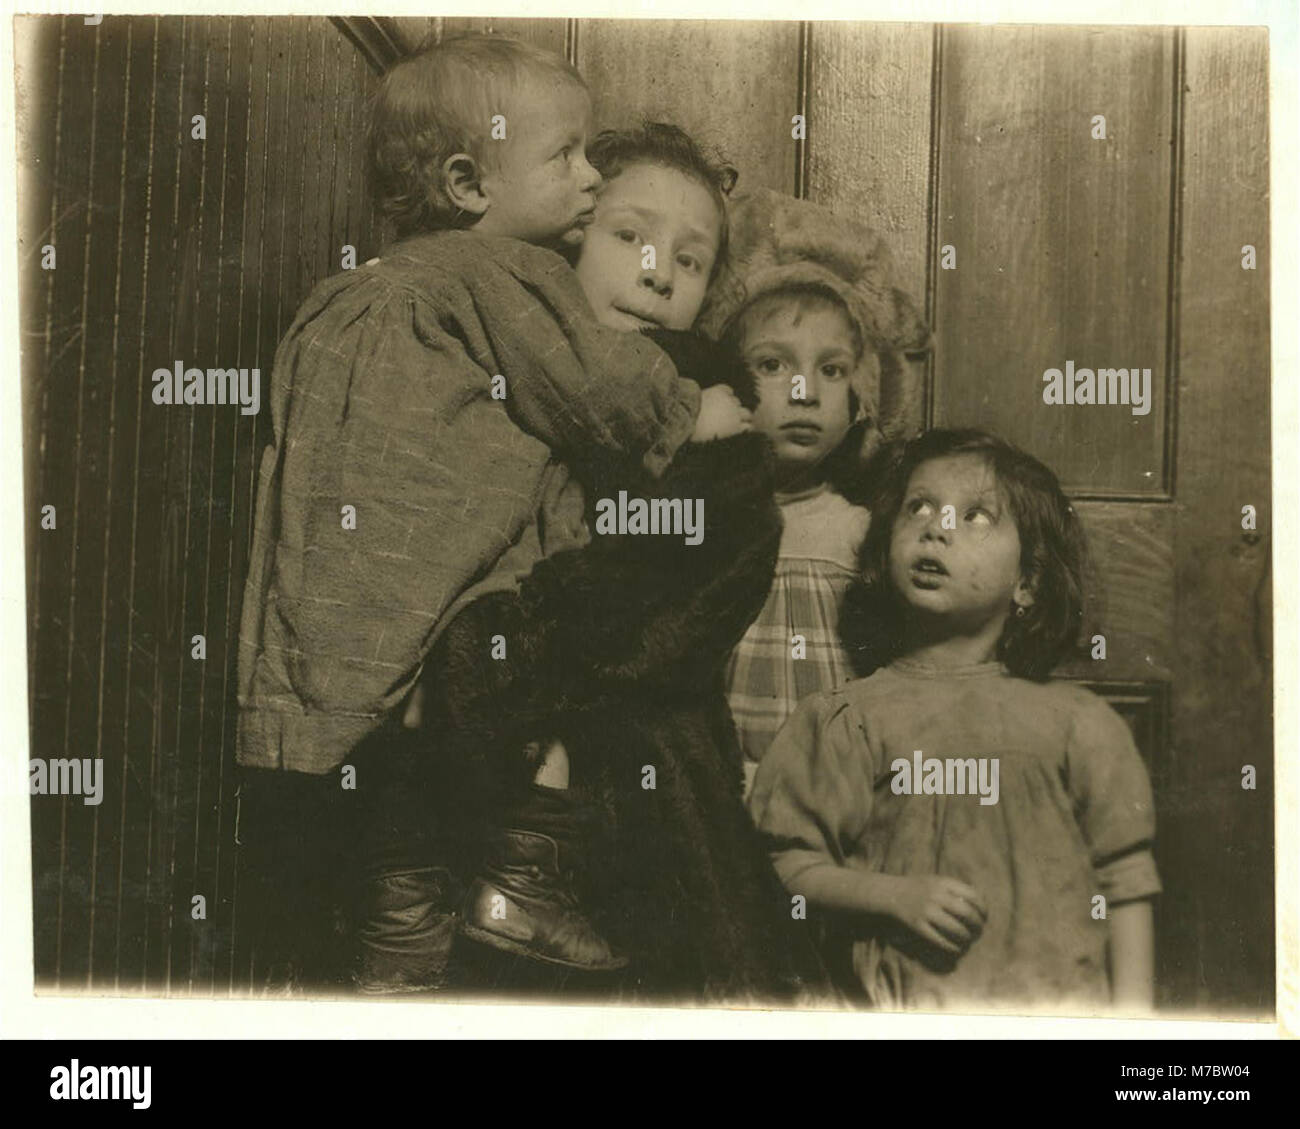 3-30 P.M. Group in tenement hallway. Ages, 14 months, 2, 5, and 7 years. Mother in shop sewing. Father out of work, bartender. Family, Novi, 189 Chrystie Street. LOC nclc.04628 Stock Photo